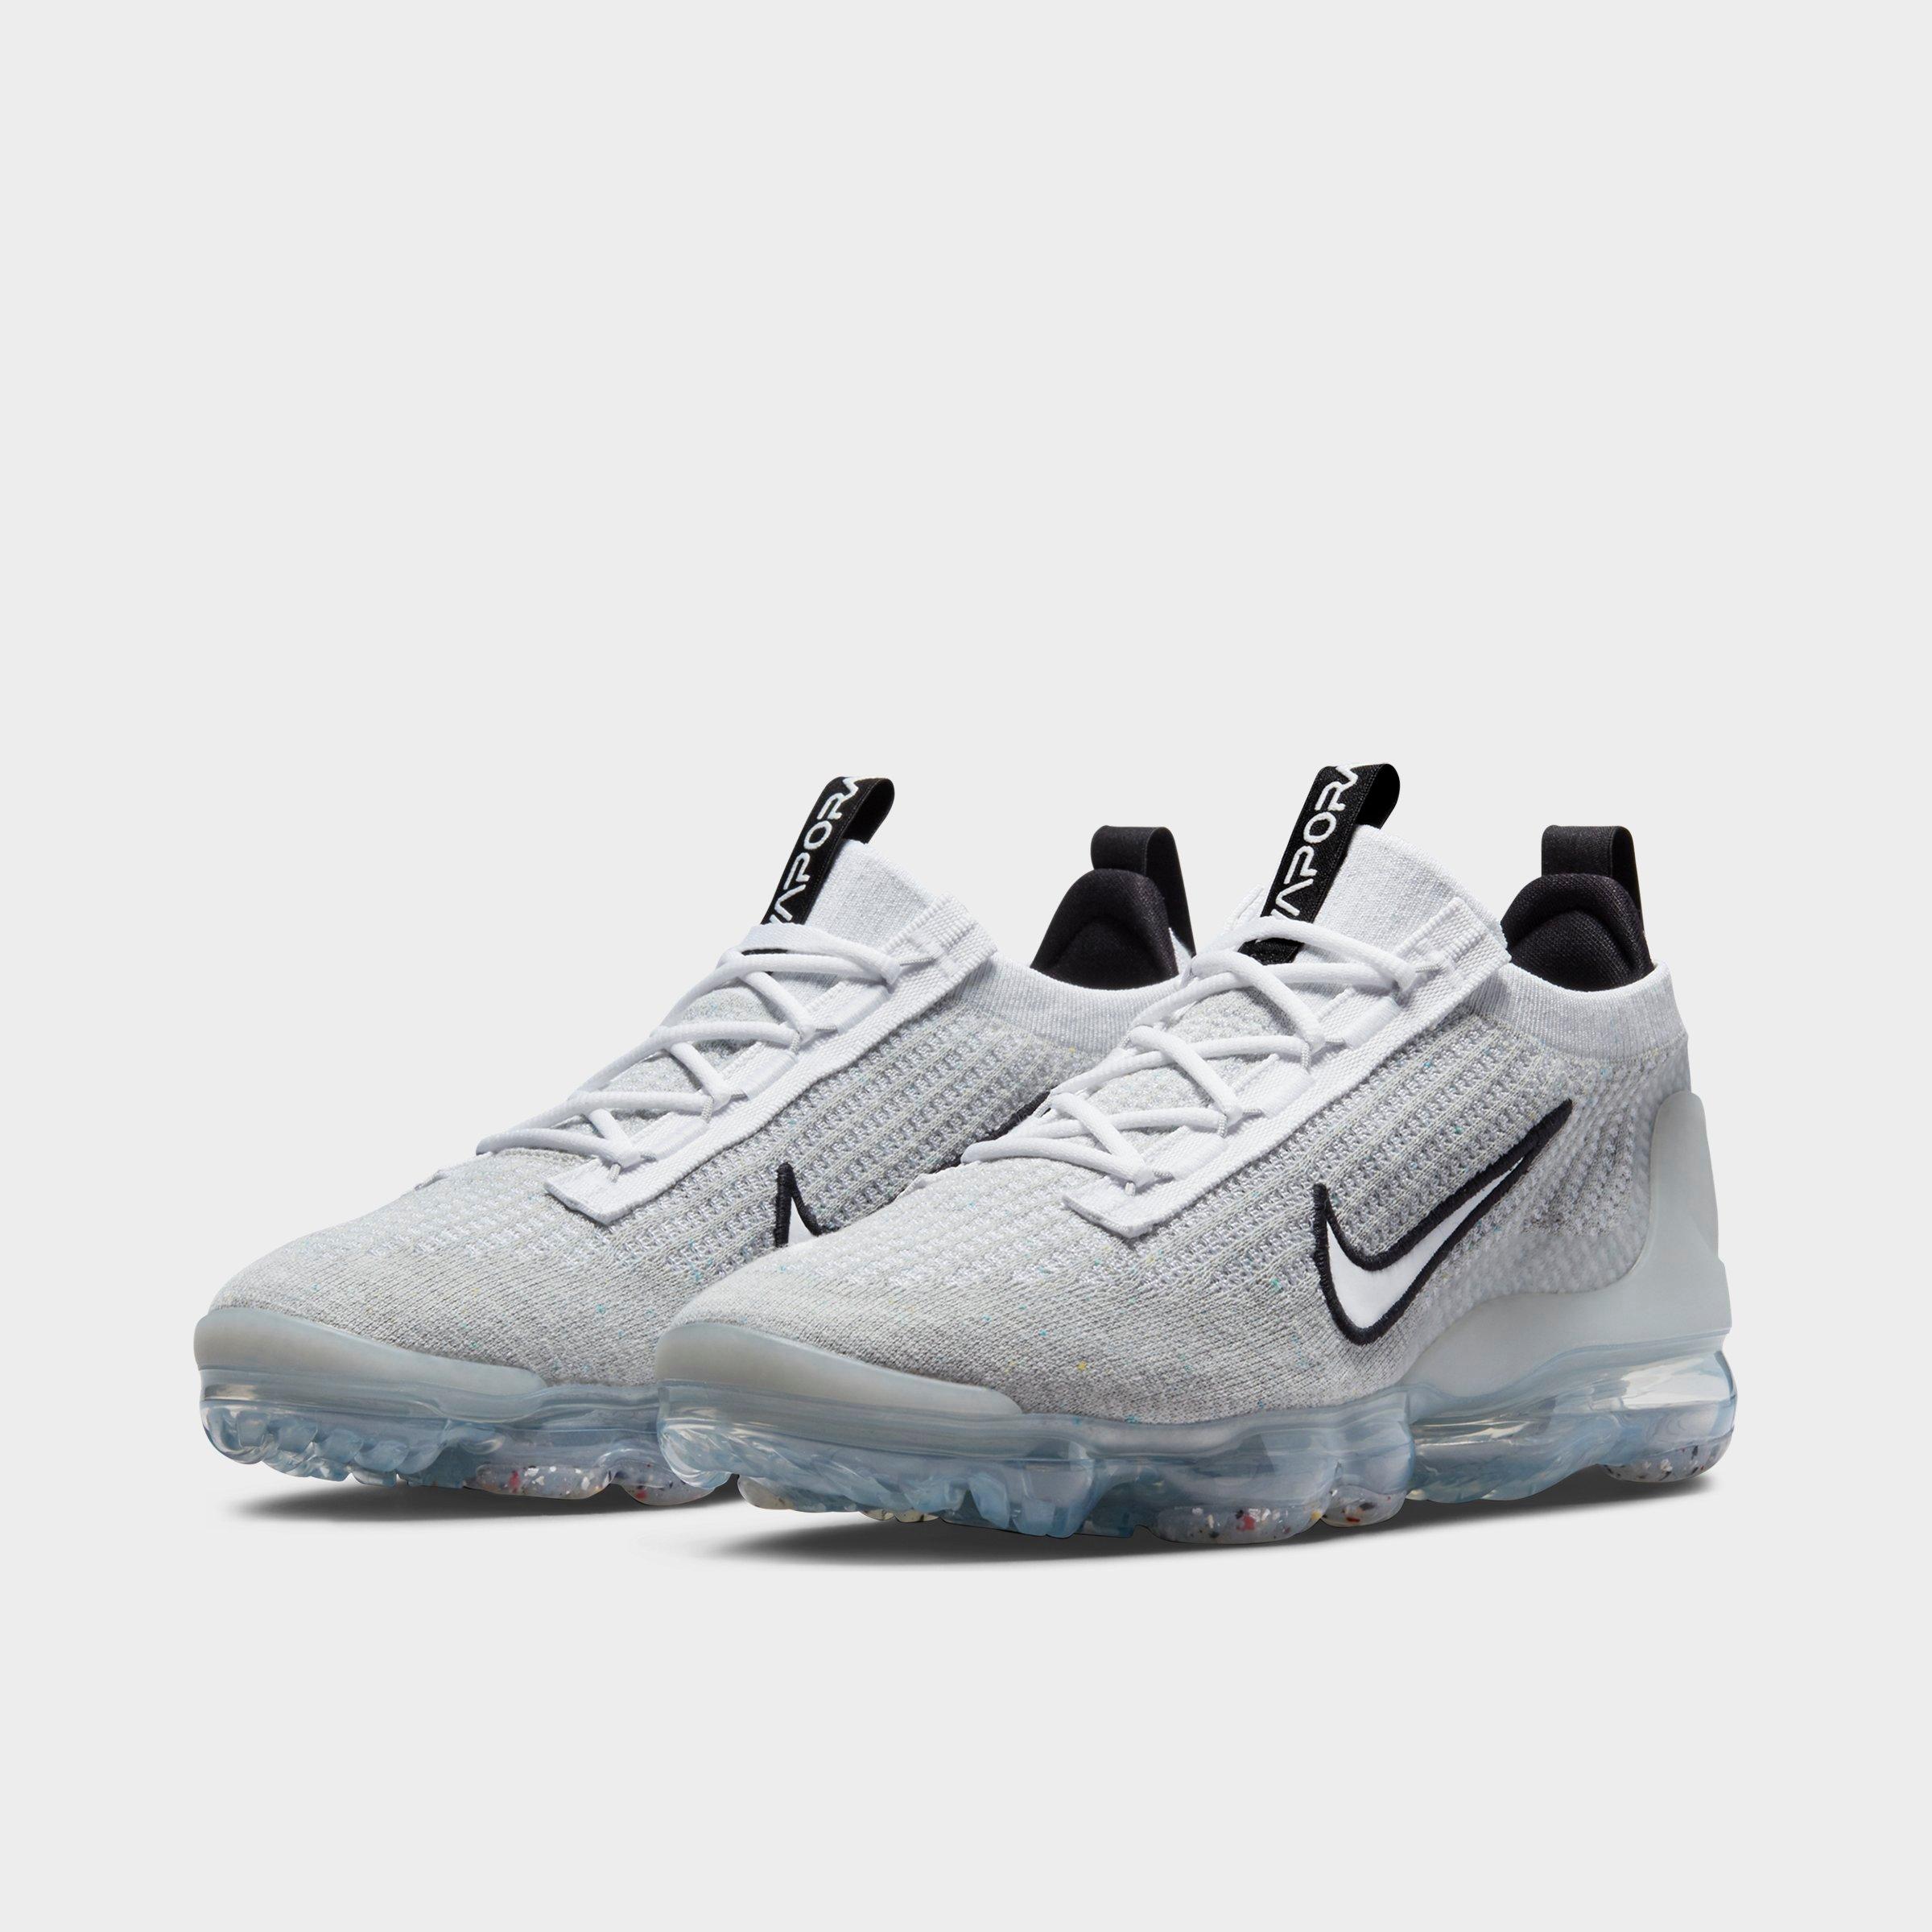 show me a picture of vapormax